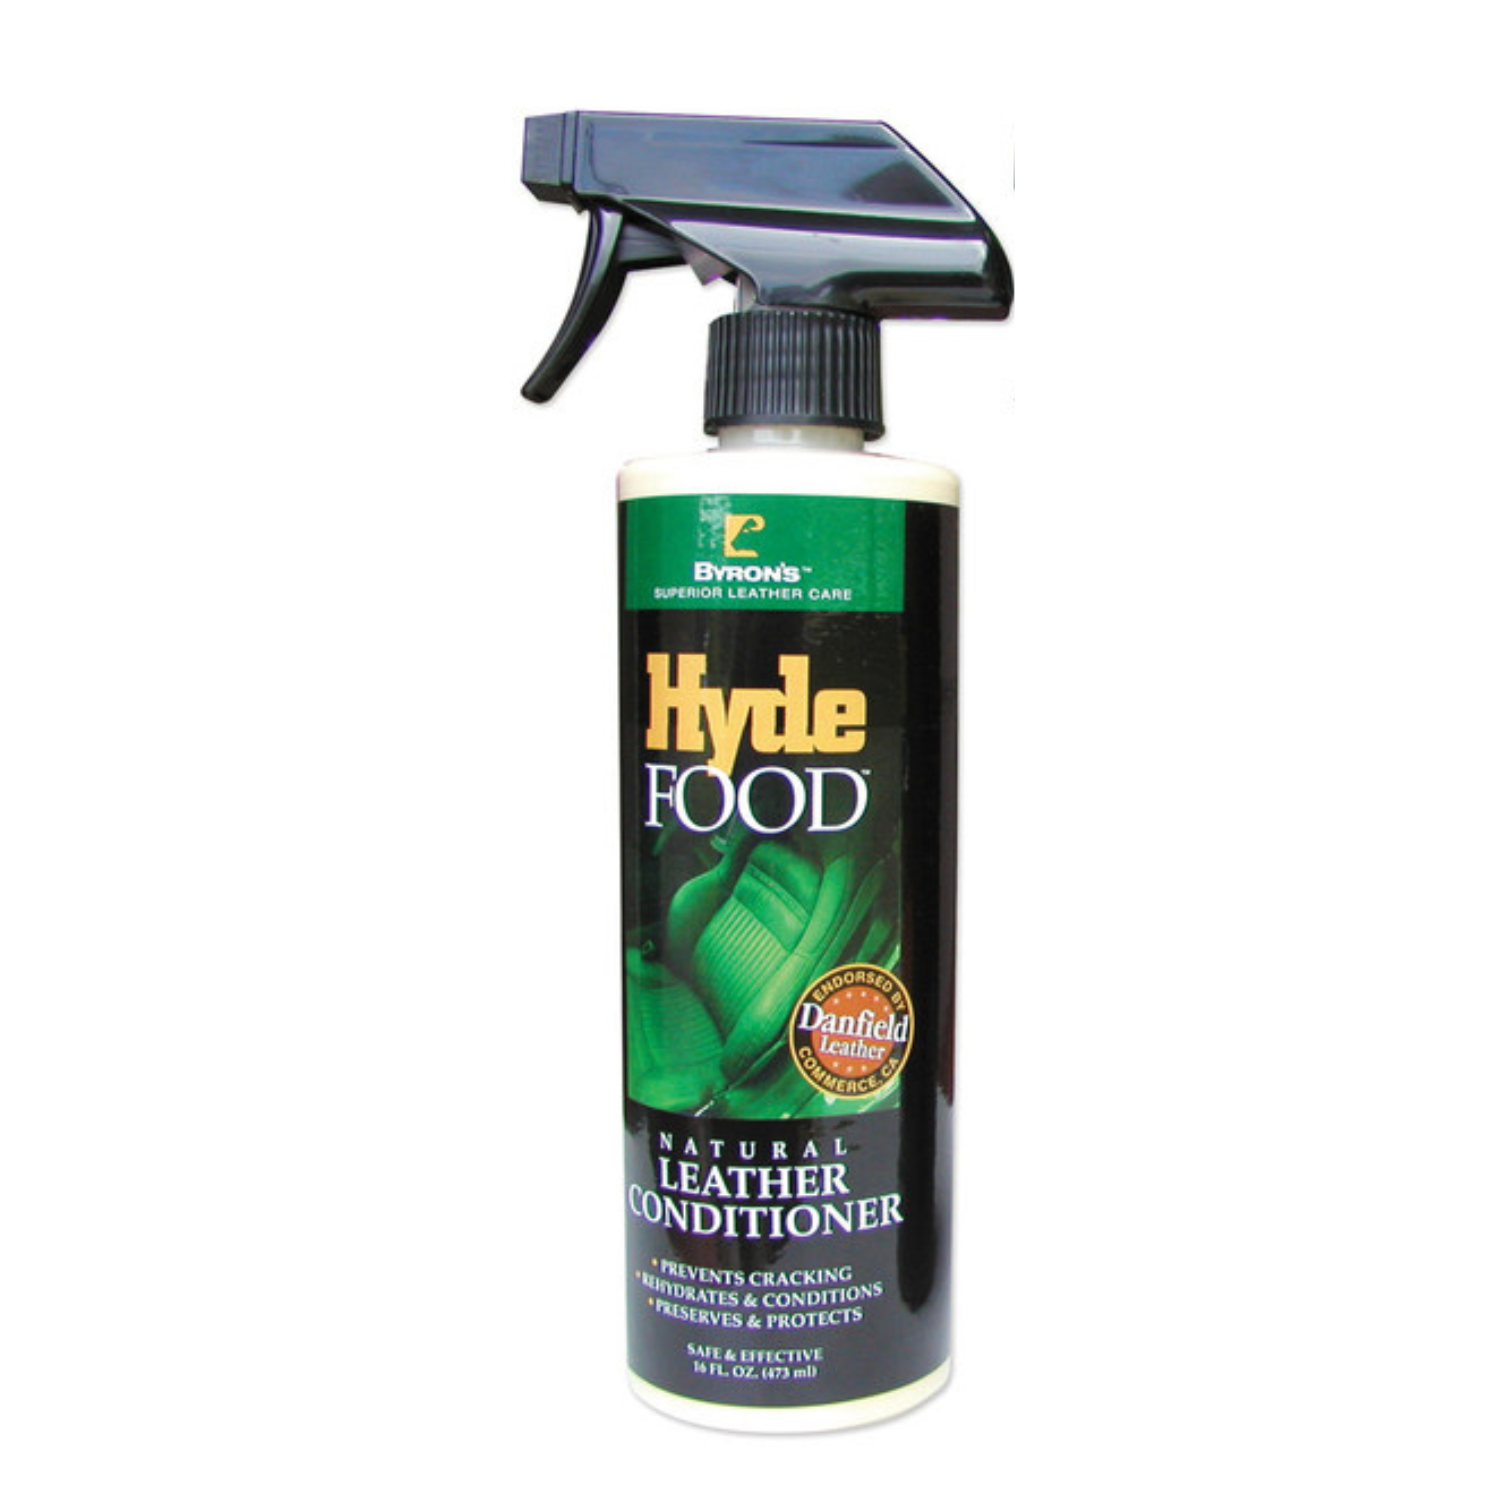 Byrons Hyde Food Conditioner